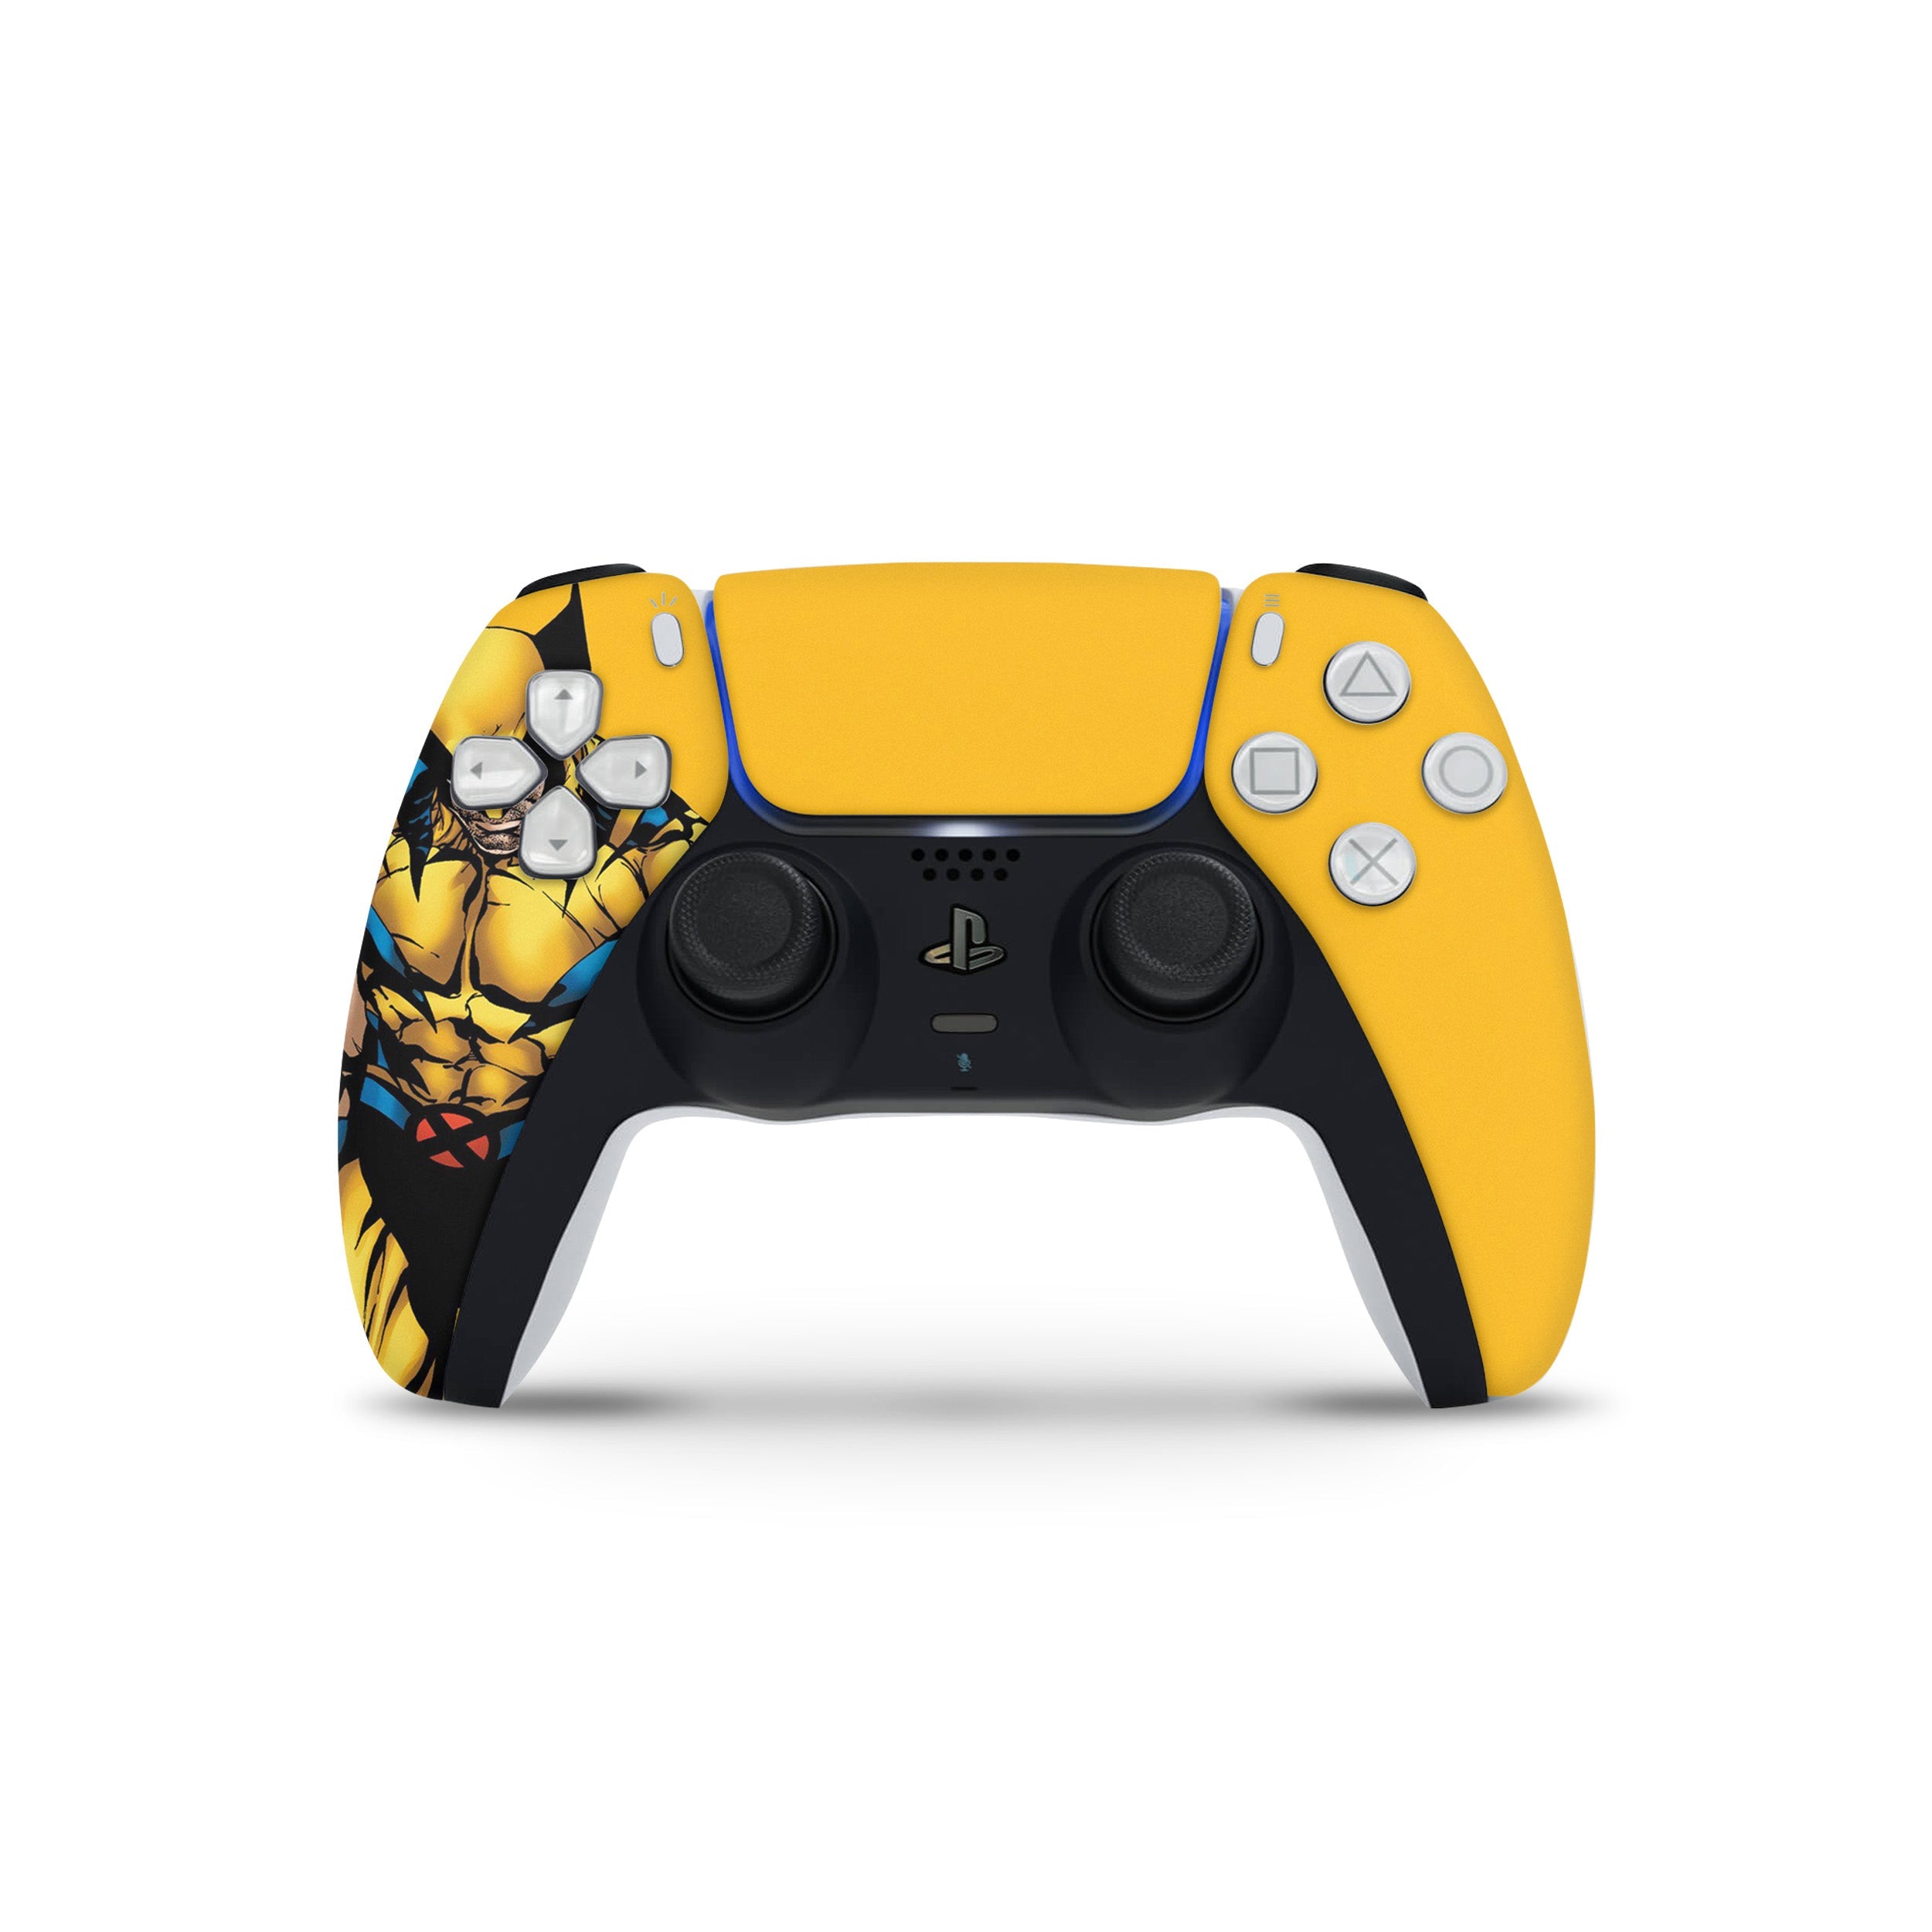 A video game skin featuring a Marvel X Men Wolverine design for the PS5 DualSense Controller.